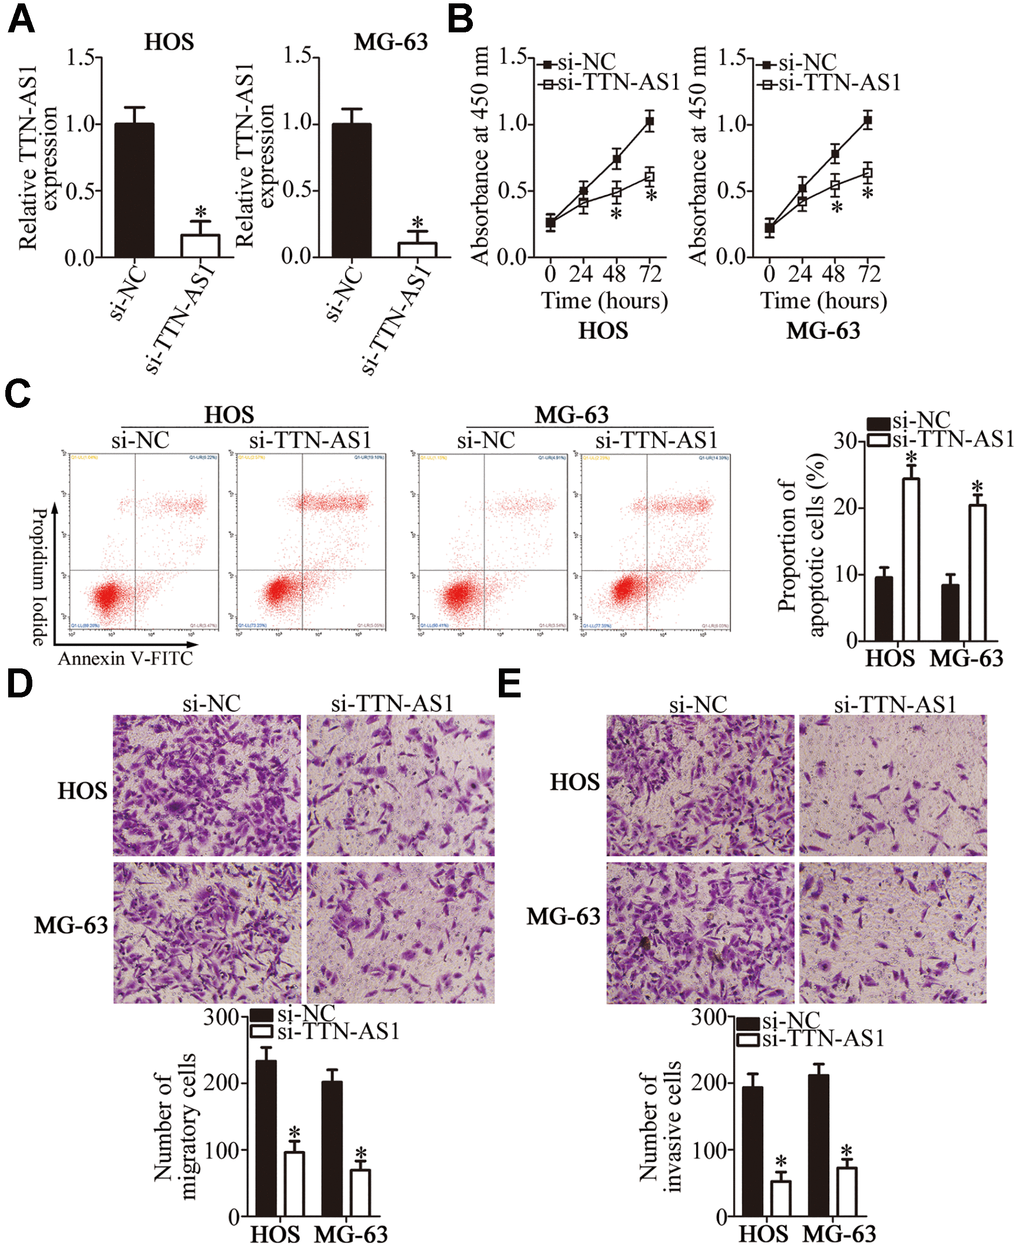 The TTN-AS1 knockdown suppresses the proliferation, migration, and invasiveness but promotes the apoptosis of HOS and MG-63 cells. (A) HOS and MG-63 cells were transfected with either si-TTN-AS1 or si-NC. At 48 h post-transfection, the cells were collected and, then, subjected to RT-qPCR analysis for transfection efficiency evaluation. *P B) The CCK-8 assay was conducted to assess cellular proliferation after 0, 24, 48, and 72 h of cultivation of si-TTN-AS1-transfected or si-NC-transfected HOS and MG-63 cells. *P C) Flow cytometry was performed to determine the apoptotic rate of HOS and MG-63 cells after transfection with either si-TTN-AS1 or si-NC. *P D, E) The migratory and invasive abilities of TTN-AS1–deficient HOS and MG-63 cells were analyzed in Transwell migration and invasion assays. *P 